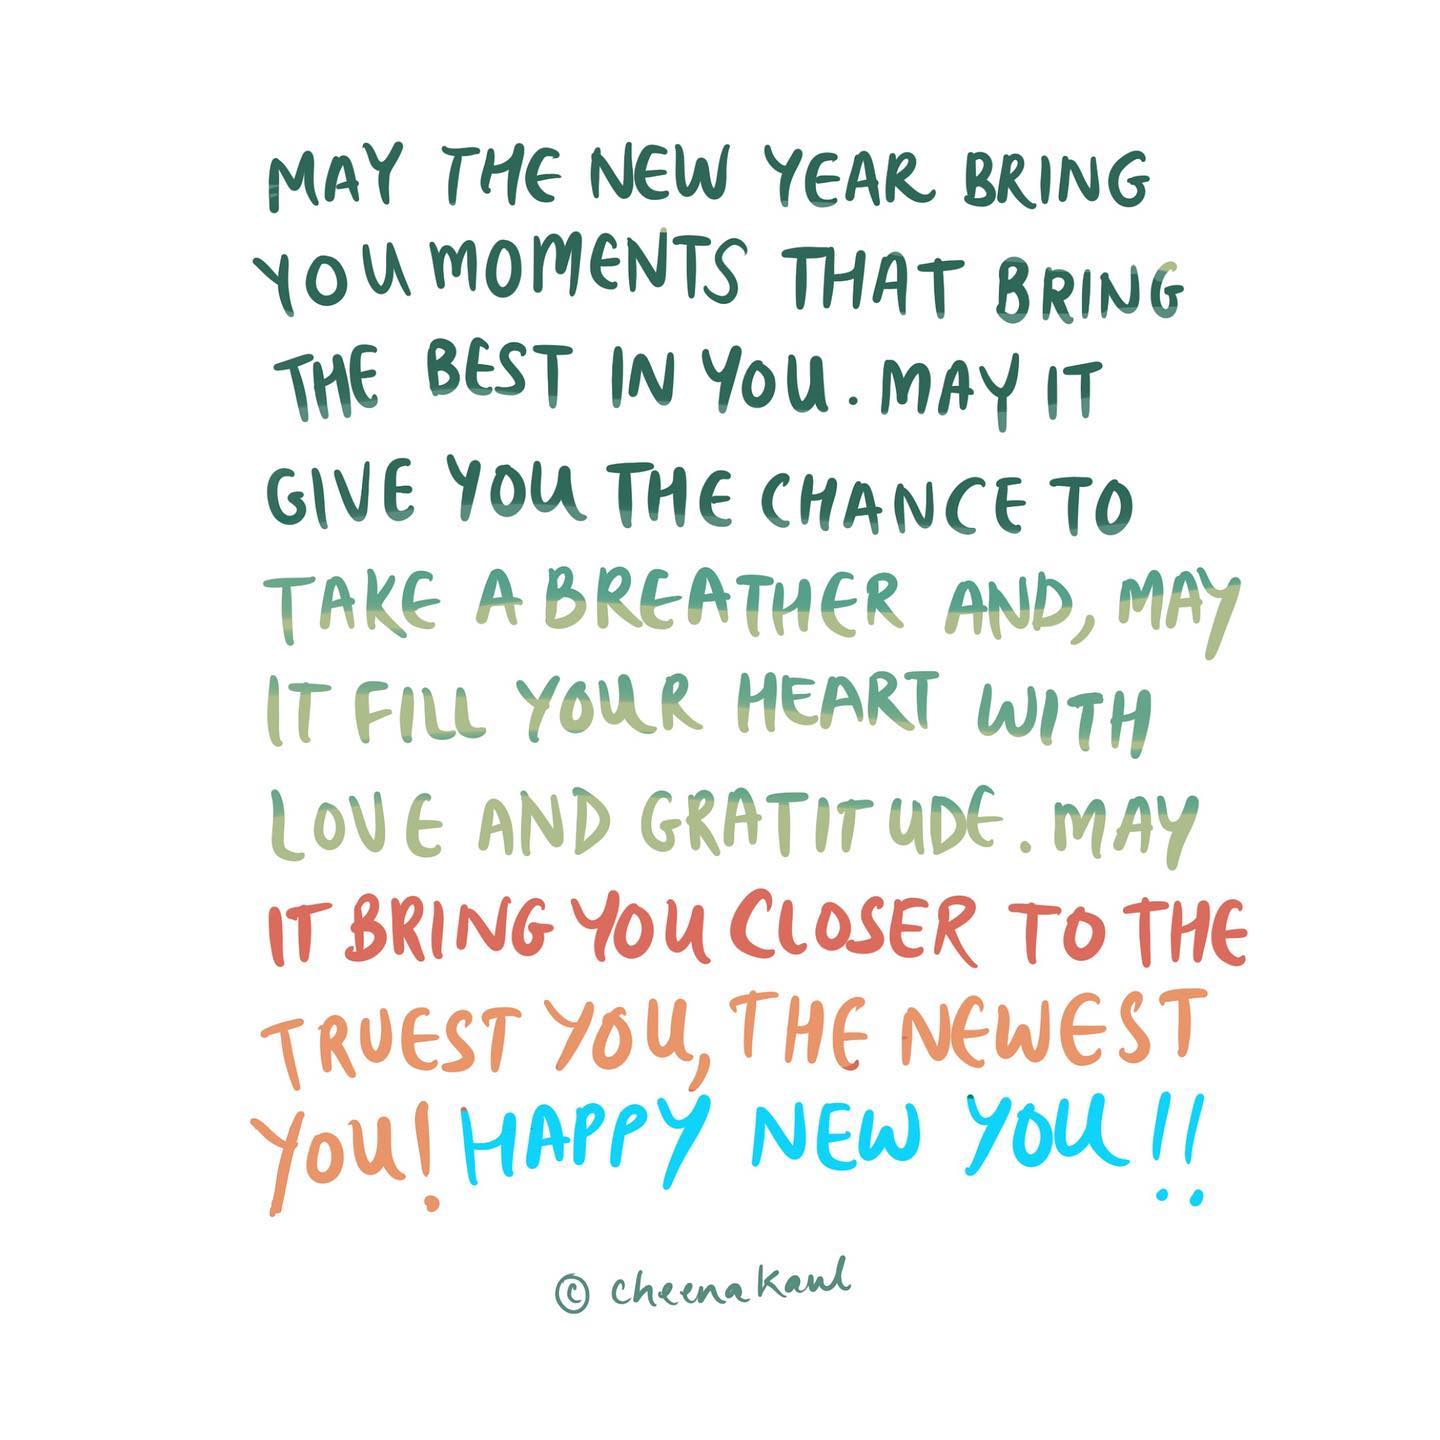 May the New Year bring you moments that bring the best in you. May it give you the chance to take a breather and, may it fill your heart with love and gratitude. May it bring you closer to the truest you, the newest you! 

Happy New you!!

C